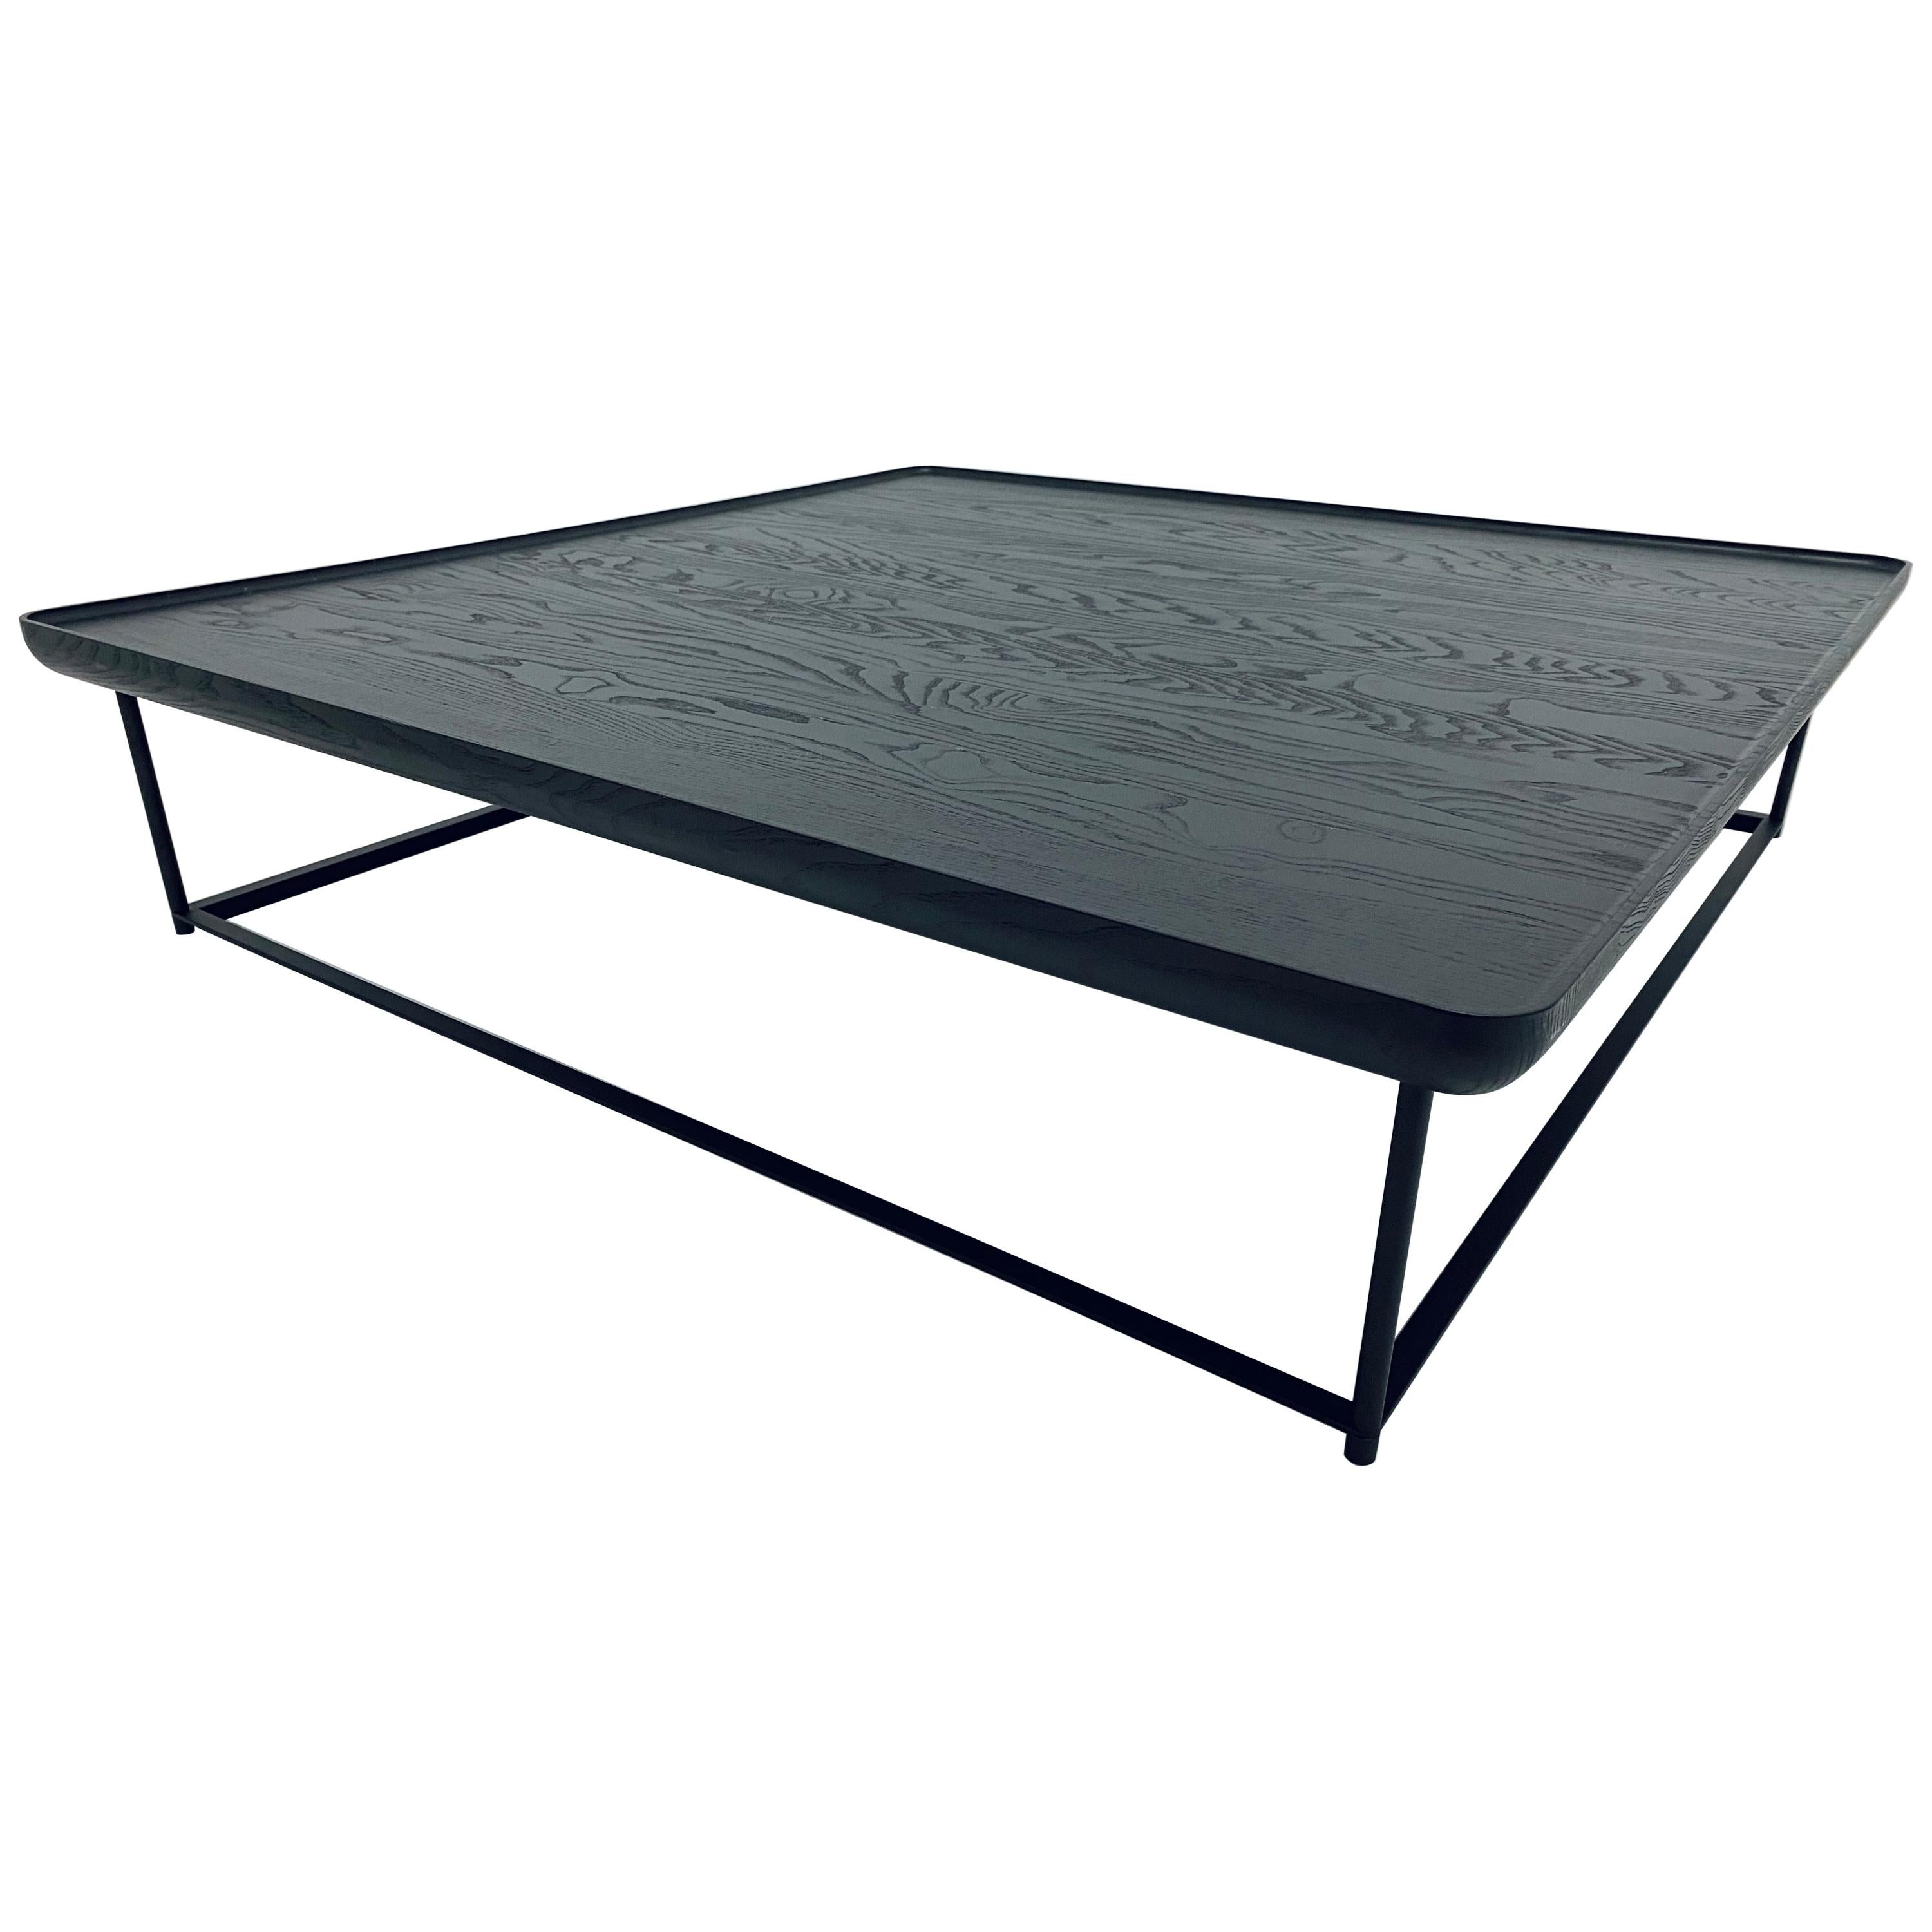 Luca Nichetto "Torei" Low Coffee Table in Ashwood Black Stain for Cassina